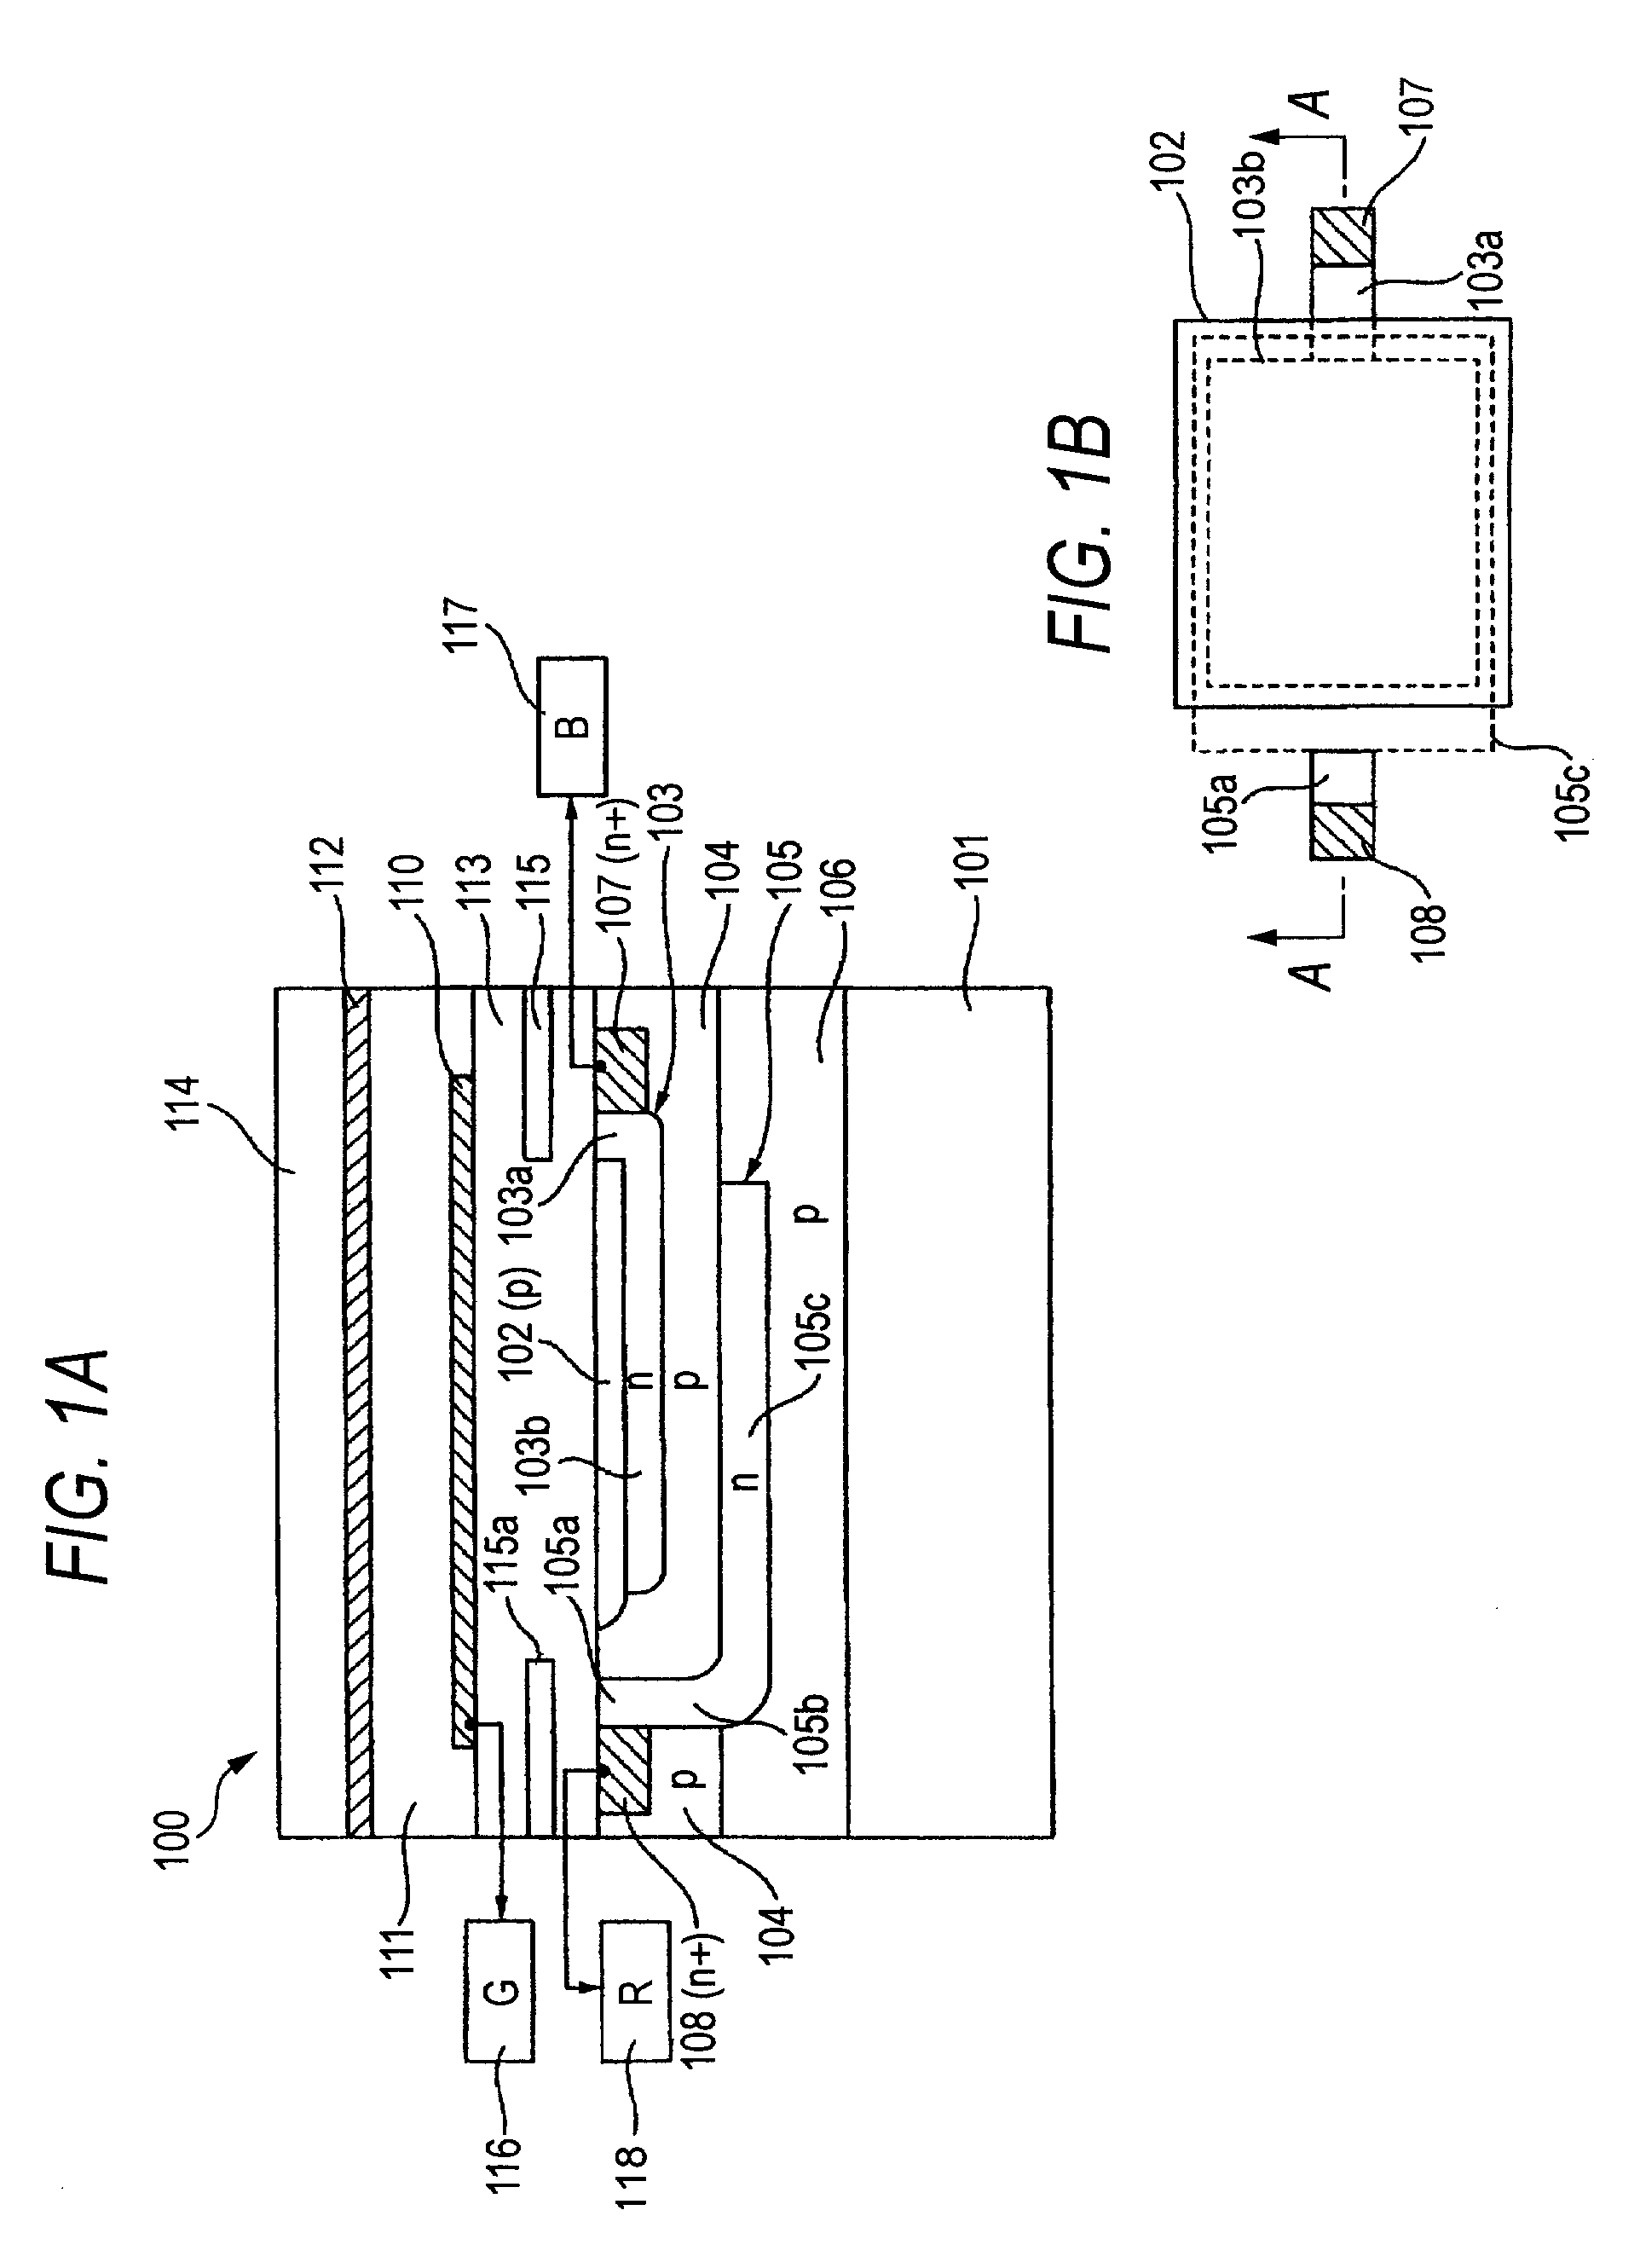 Single plate-type color solid-state image sensing device